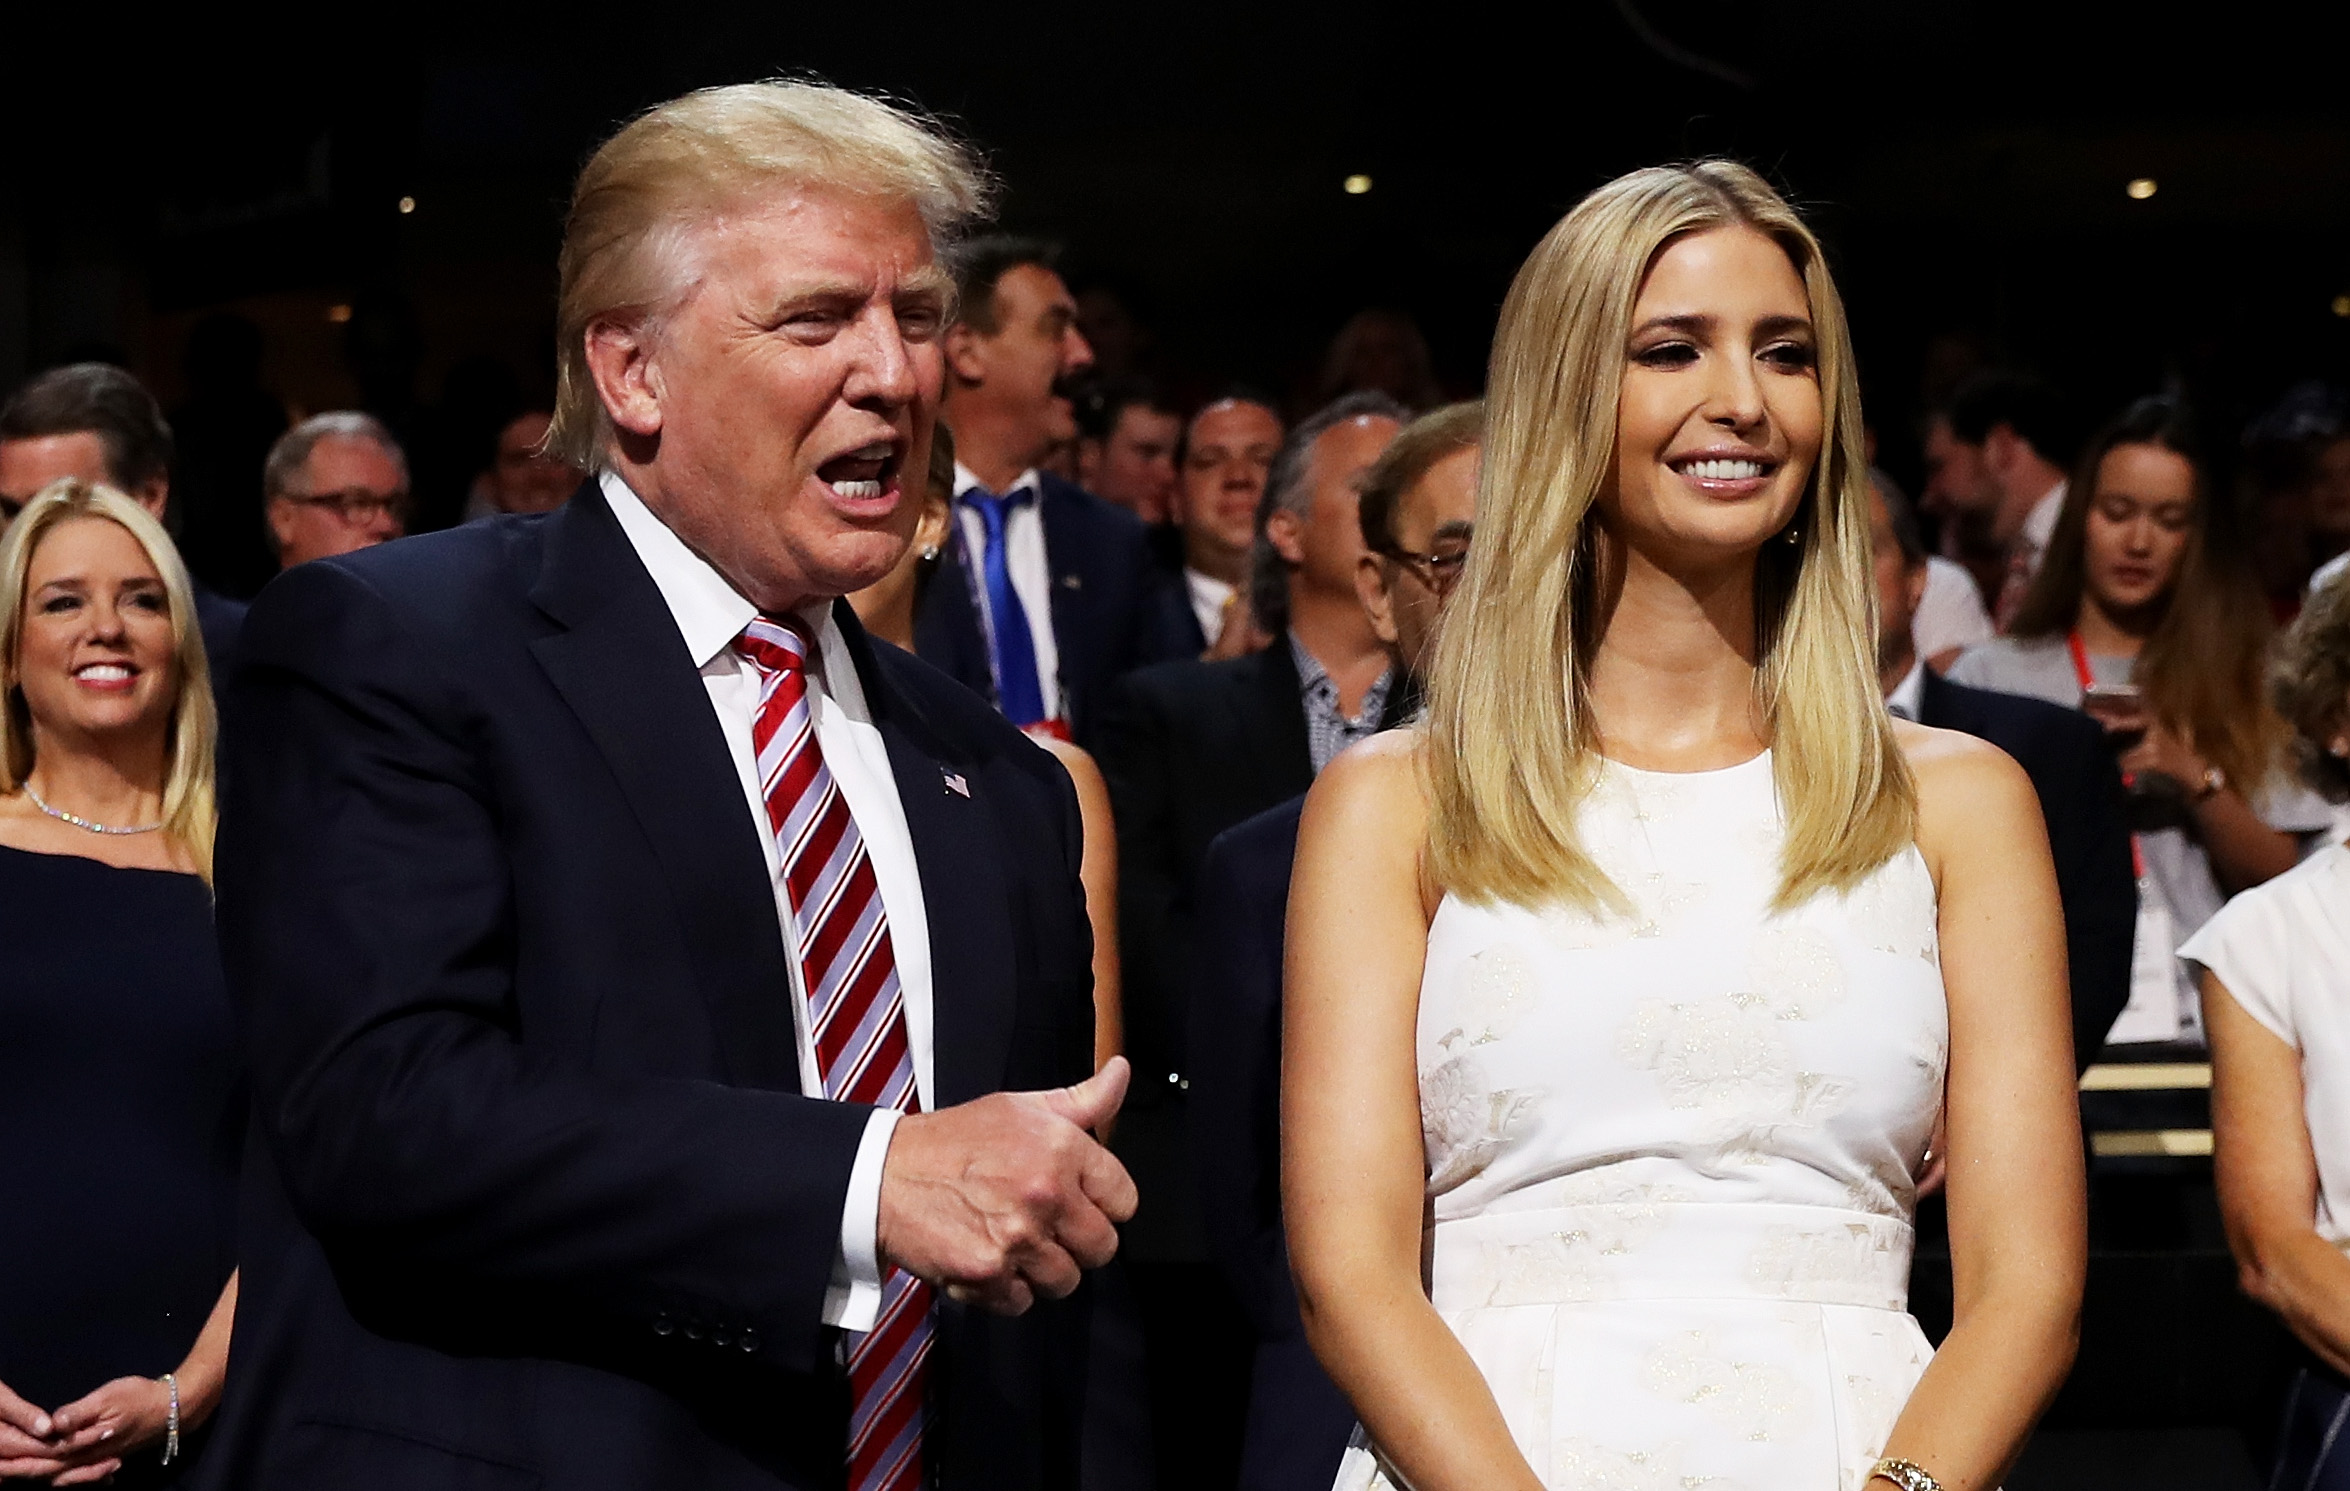 CLEVELAND, OH - JULY 20: Republican presidential candidate Donald Trump and Ivanka Trump attend the third day of the Republican National Convention on July 20, 2016 at the Quicken Loans Arena in Cleveland, Ohio. Republican presidential candidate Donald Trump received the number of votes needed to secure the party's nomination. An estimated 50,000 people are expected in Cleveland, including hundreds of protesters and members of the media. The four-day Republican National Convention kicked off on July 18. (Photo by Joe Raedle/Getty Images)